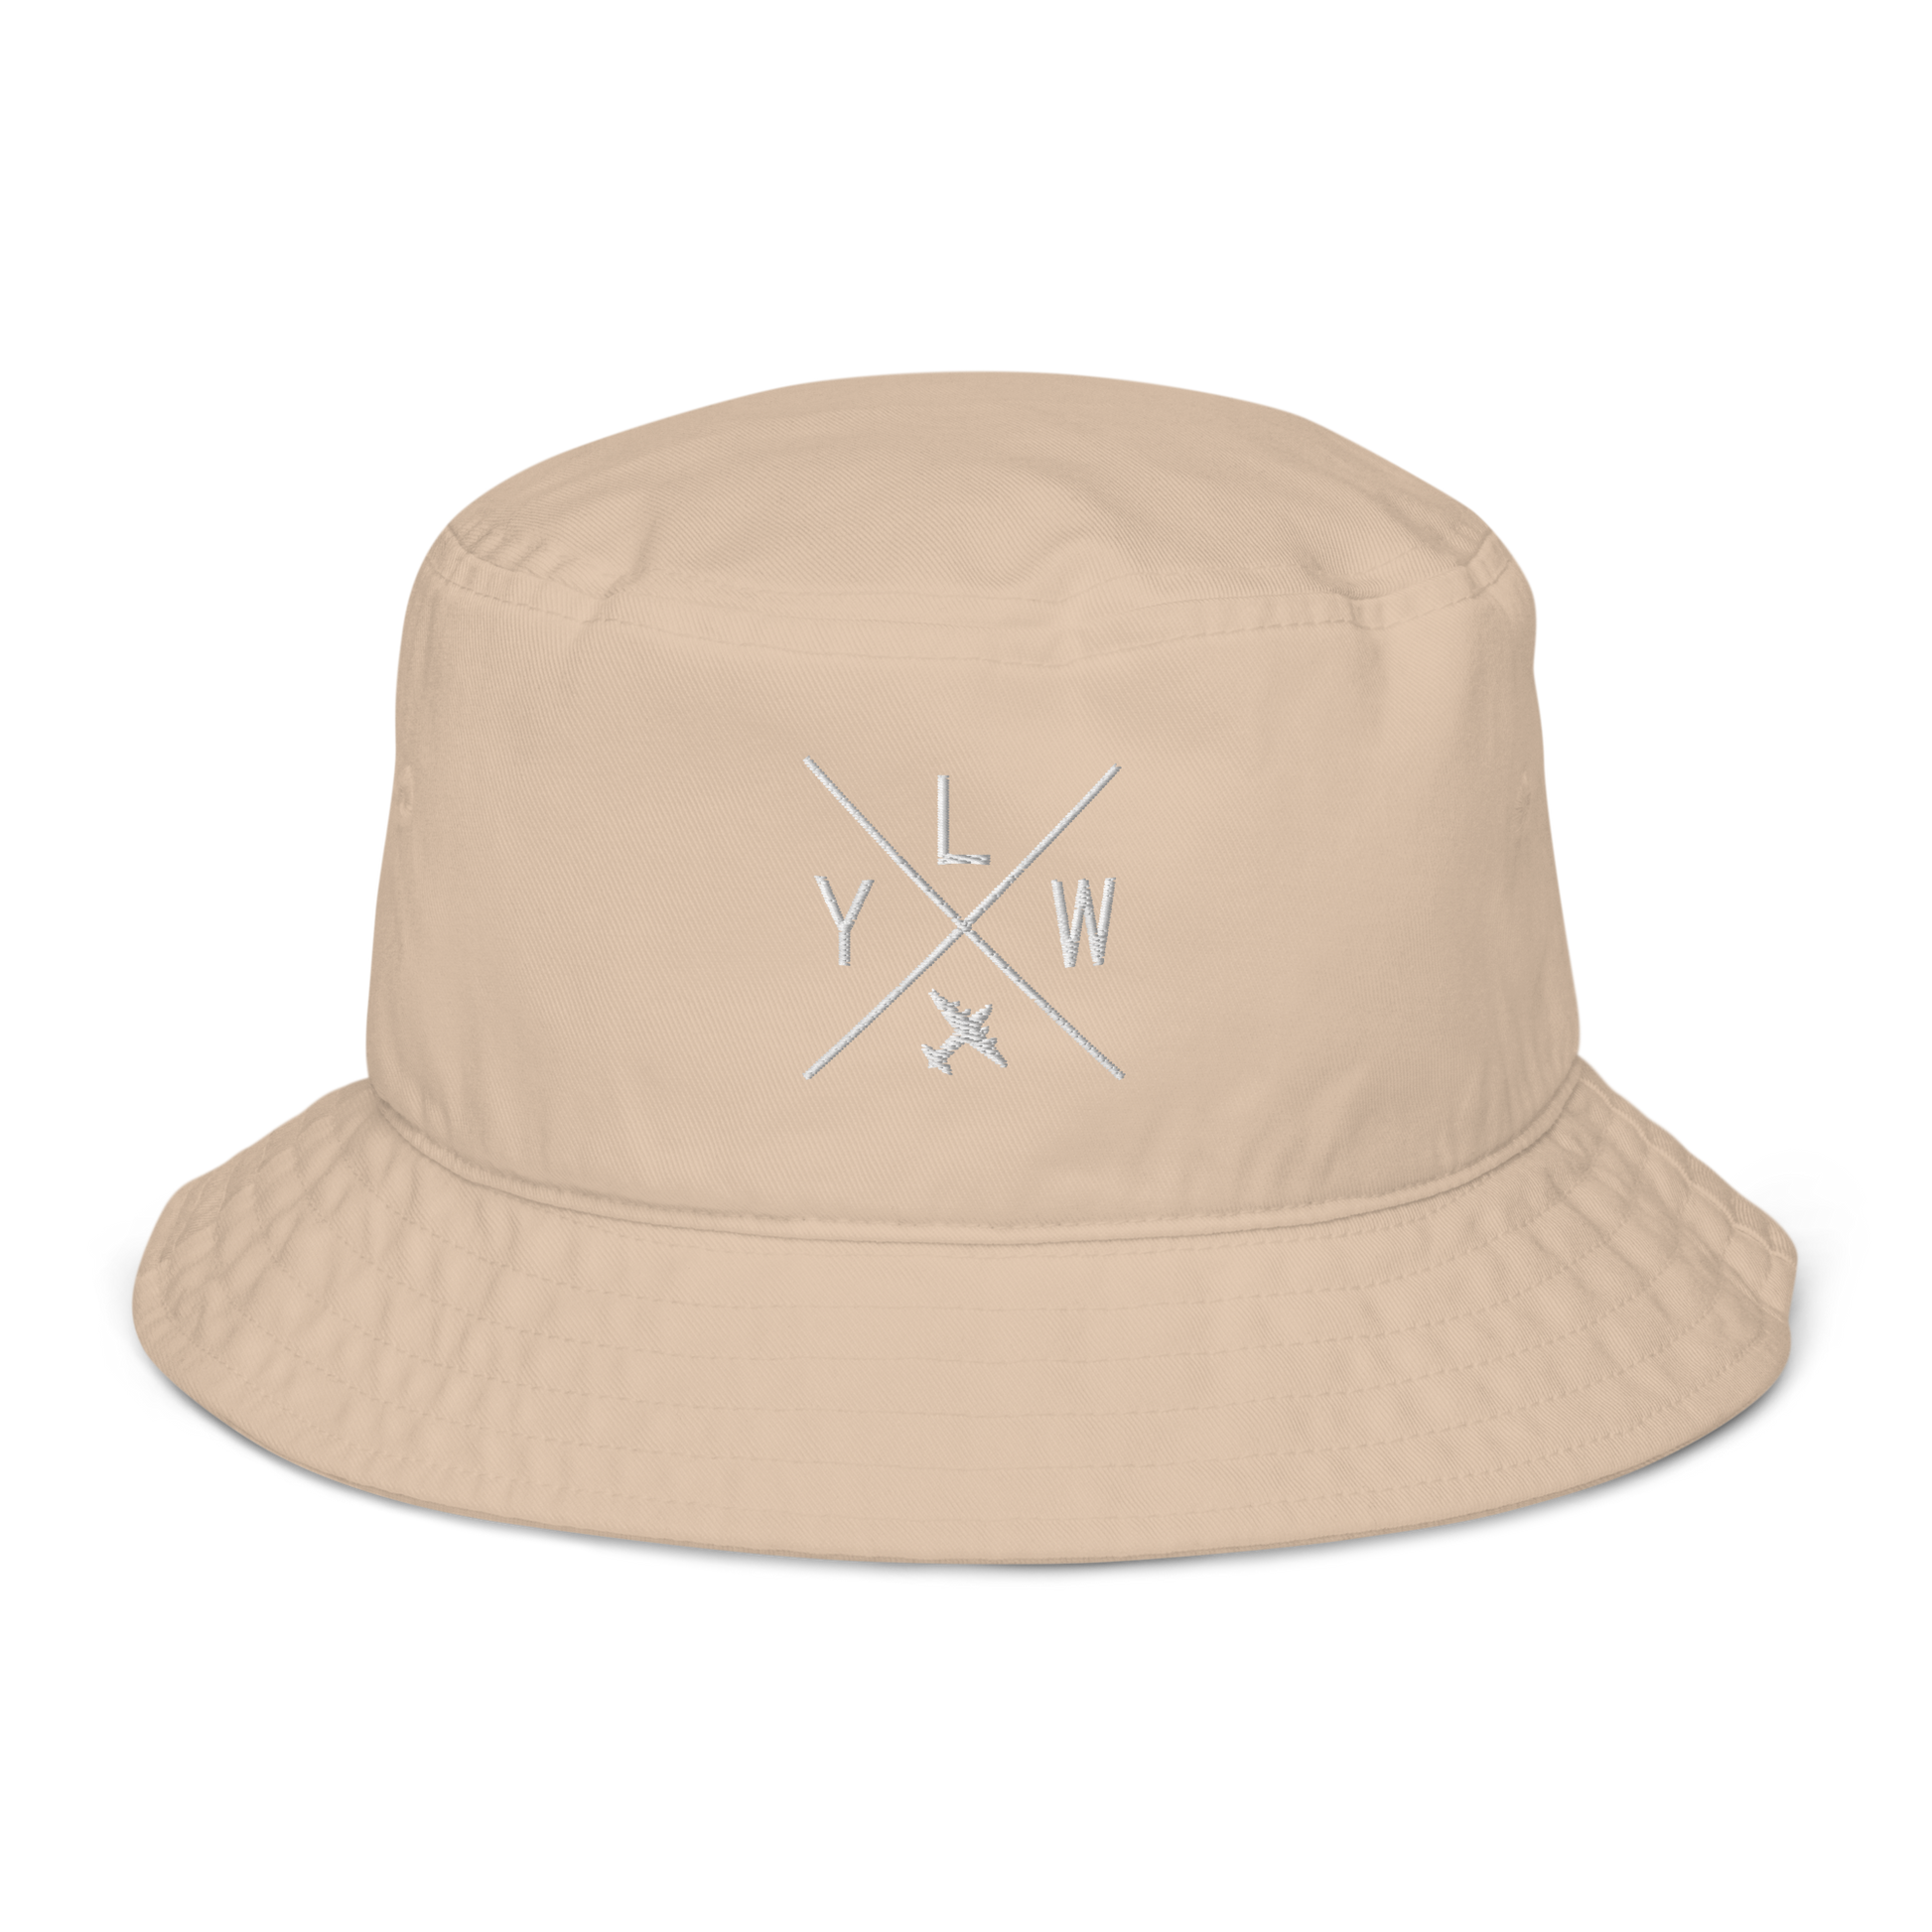 YHM Designs - YLW Kelowna Organic Cotton Bucket Hat - Crossed-X Design with Airport Code and Vintage Propliner - White Embroidery - Image 08